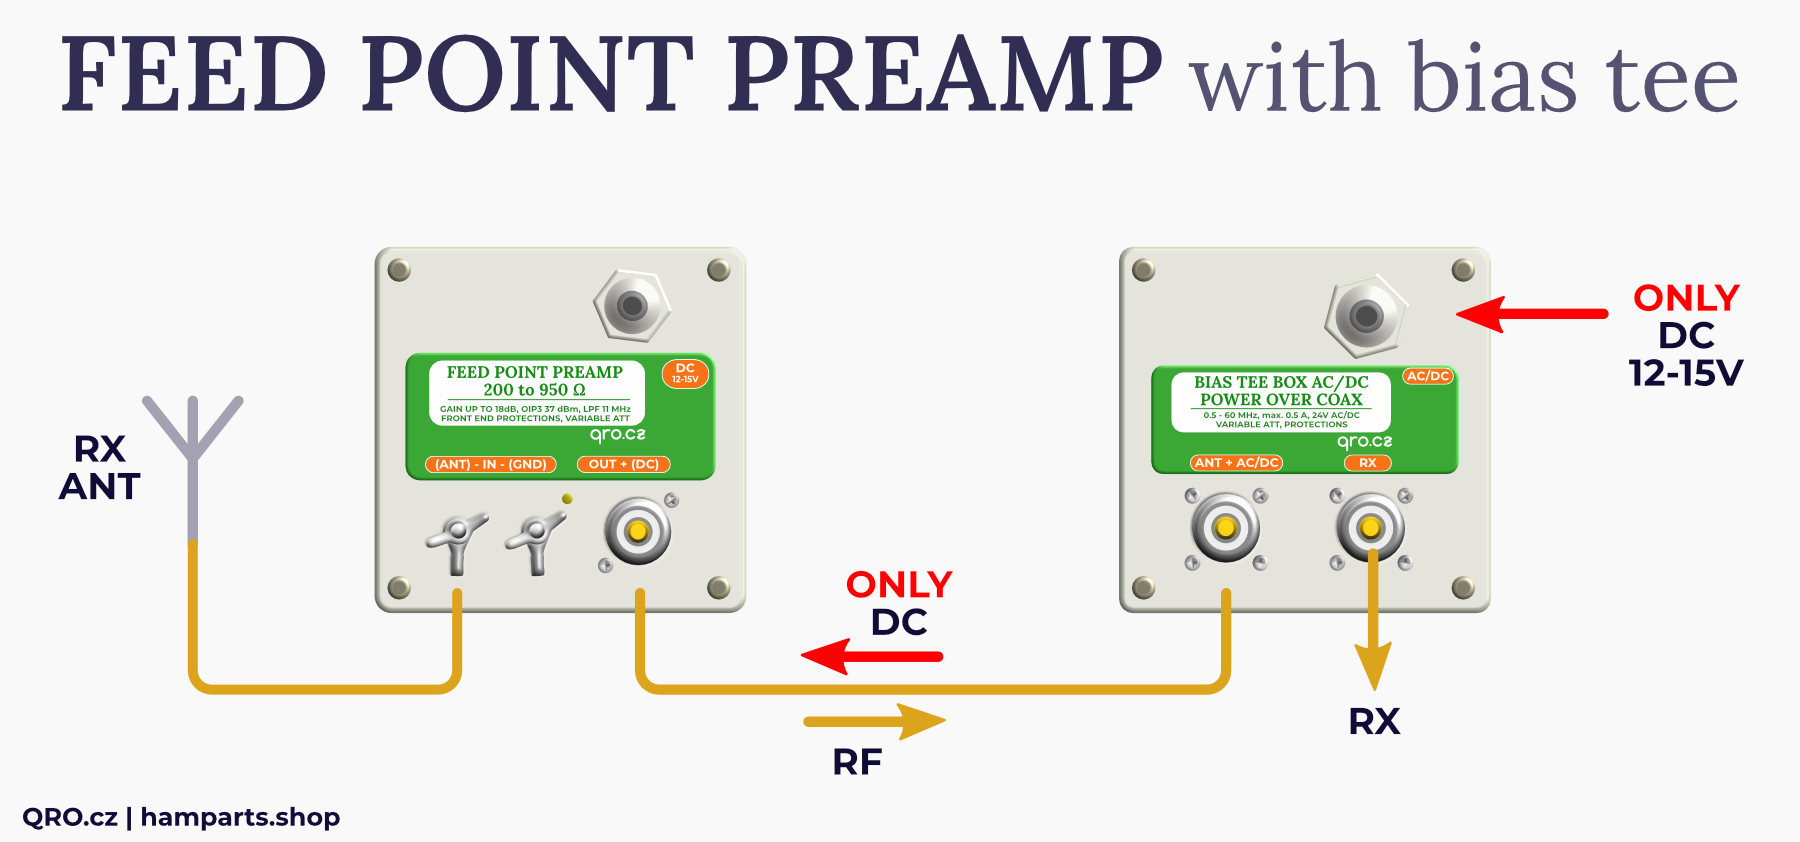 feed point preamp box pl so-239 connector connection via external bias tee over coax by qro.cz hamparts.shop